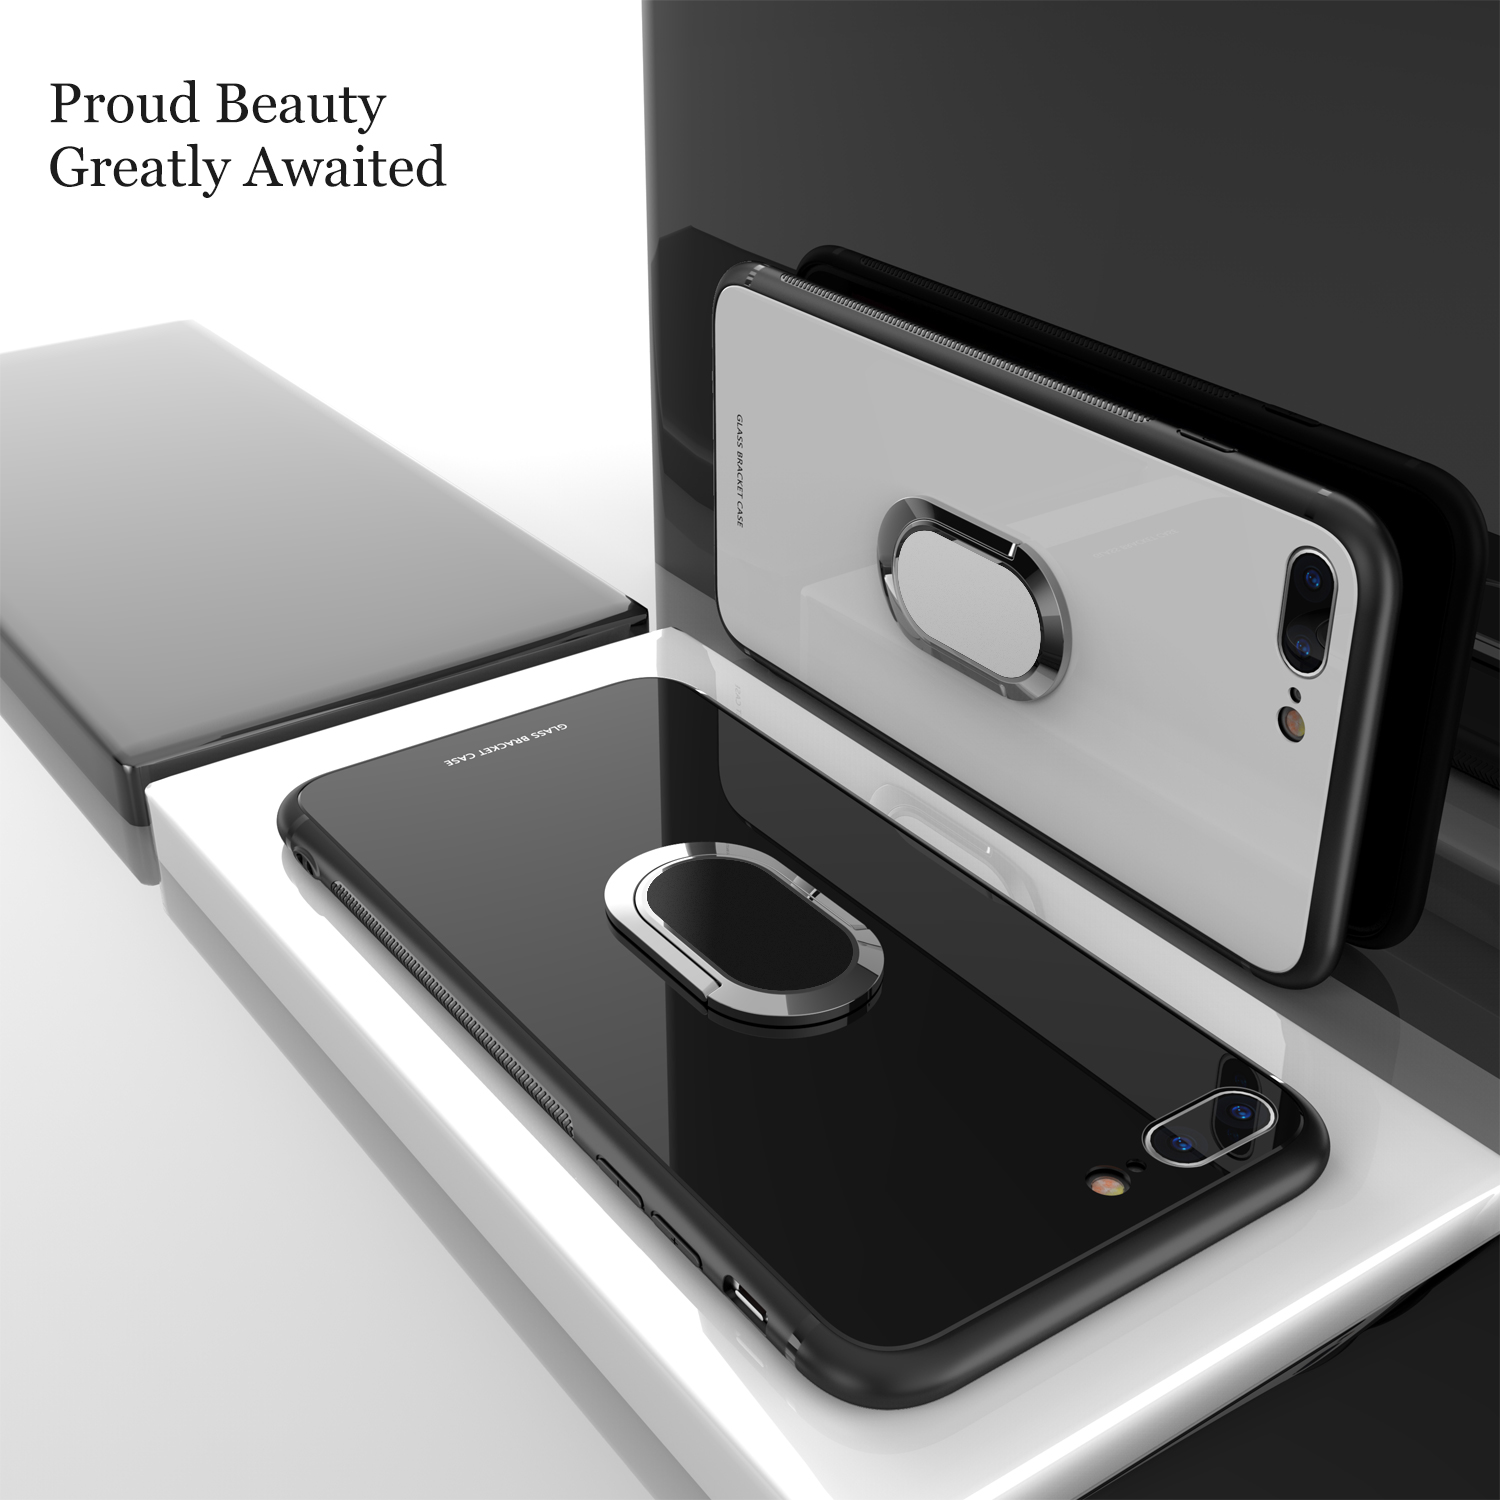 Bakeey-360deg-Rotation-Ring-Kickstand-Magnetic-Glass-Protective-Case-for-iPhone-77-Plus88-Plus-1320629-10